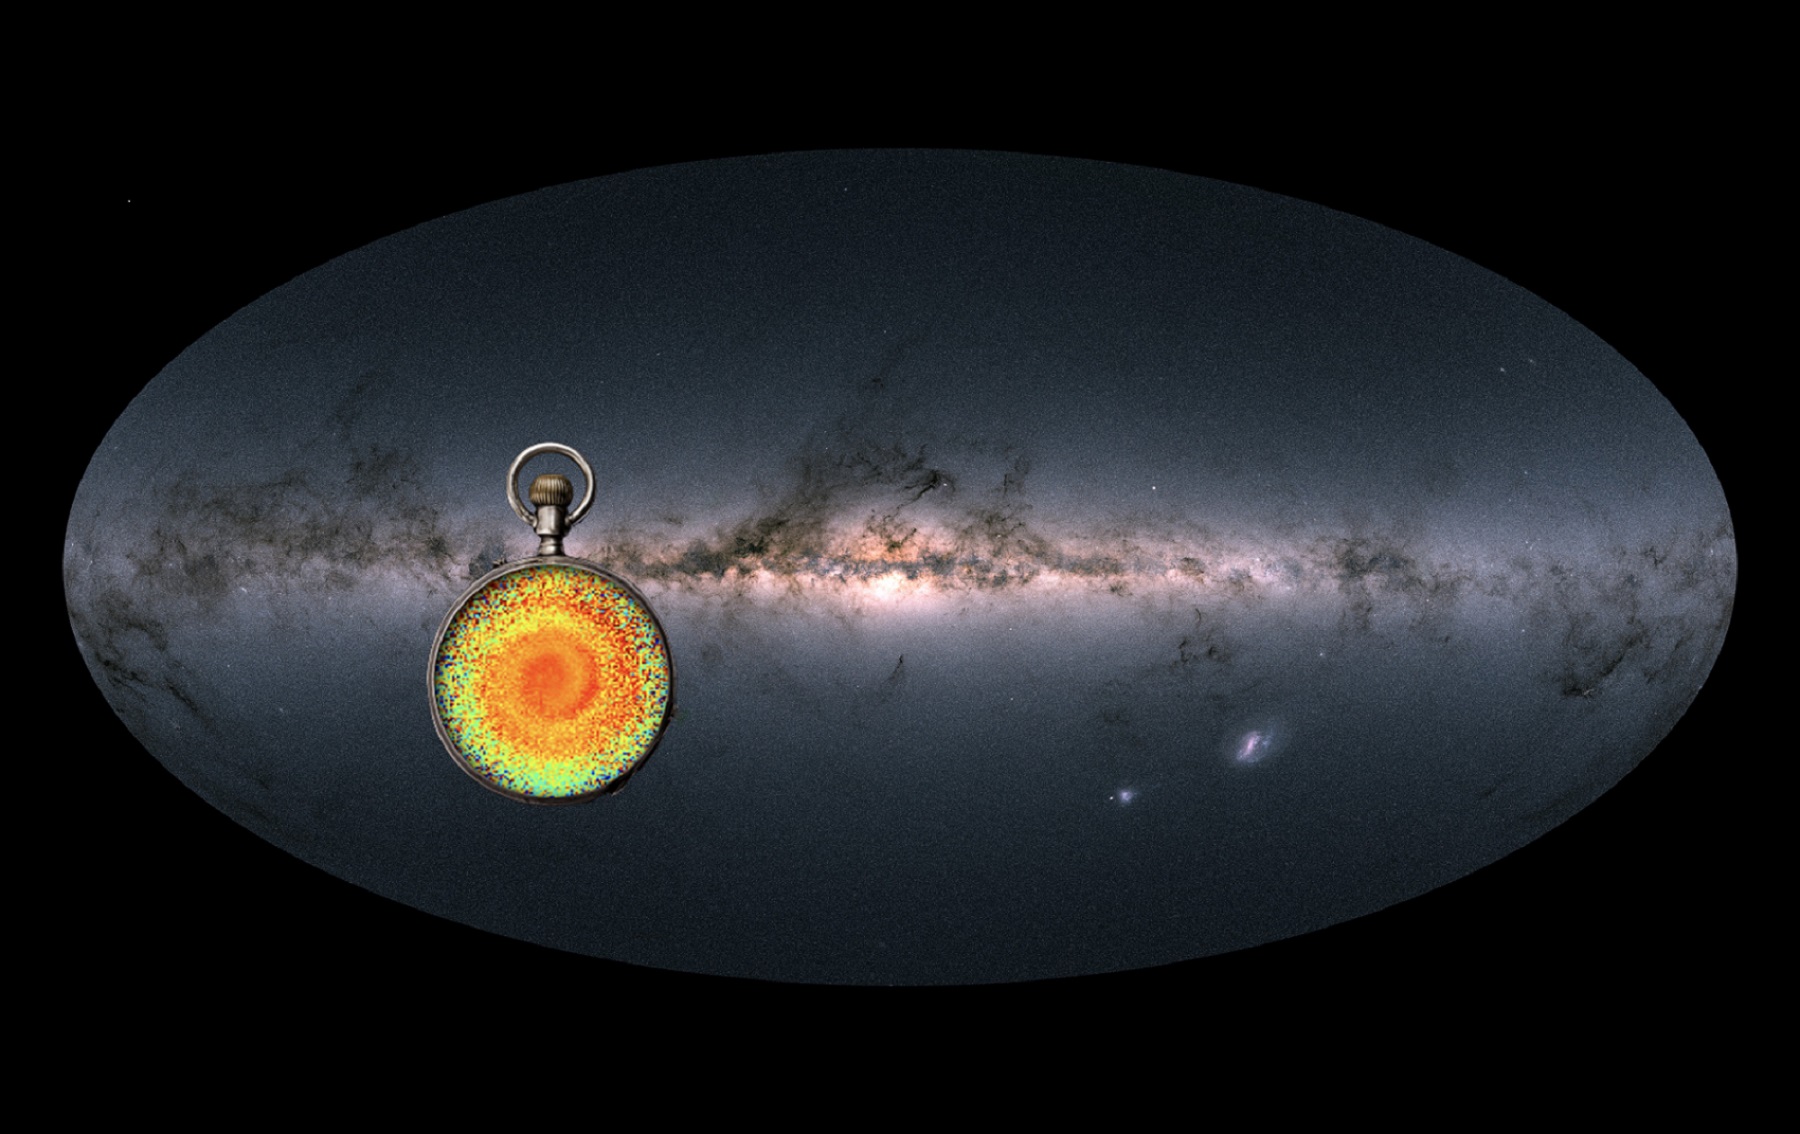 Artistic impression of the snail-like structure discovered by the team superimposed on a colour map of the Milky Way recently published by the Gaia collaboration (April 2018). The snail shell appears when combining the position and velocities of stars near the Sun. Its characteristics can be used to do galactic archeology: we can trace the origin of the snail shell to an encounter the Milky Way experienced in the recent past. (c): Edmon de Haro/iStock. Gaia sky in colours: ESA/Gaia/DPAC, A.Moitinho / A. F. Silva / M. Barros / C. Barata, University of Lisbon, Portugal; H. Savietto, Fork Research, Portugal